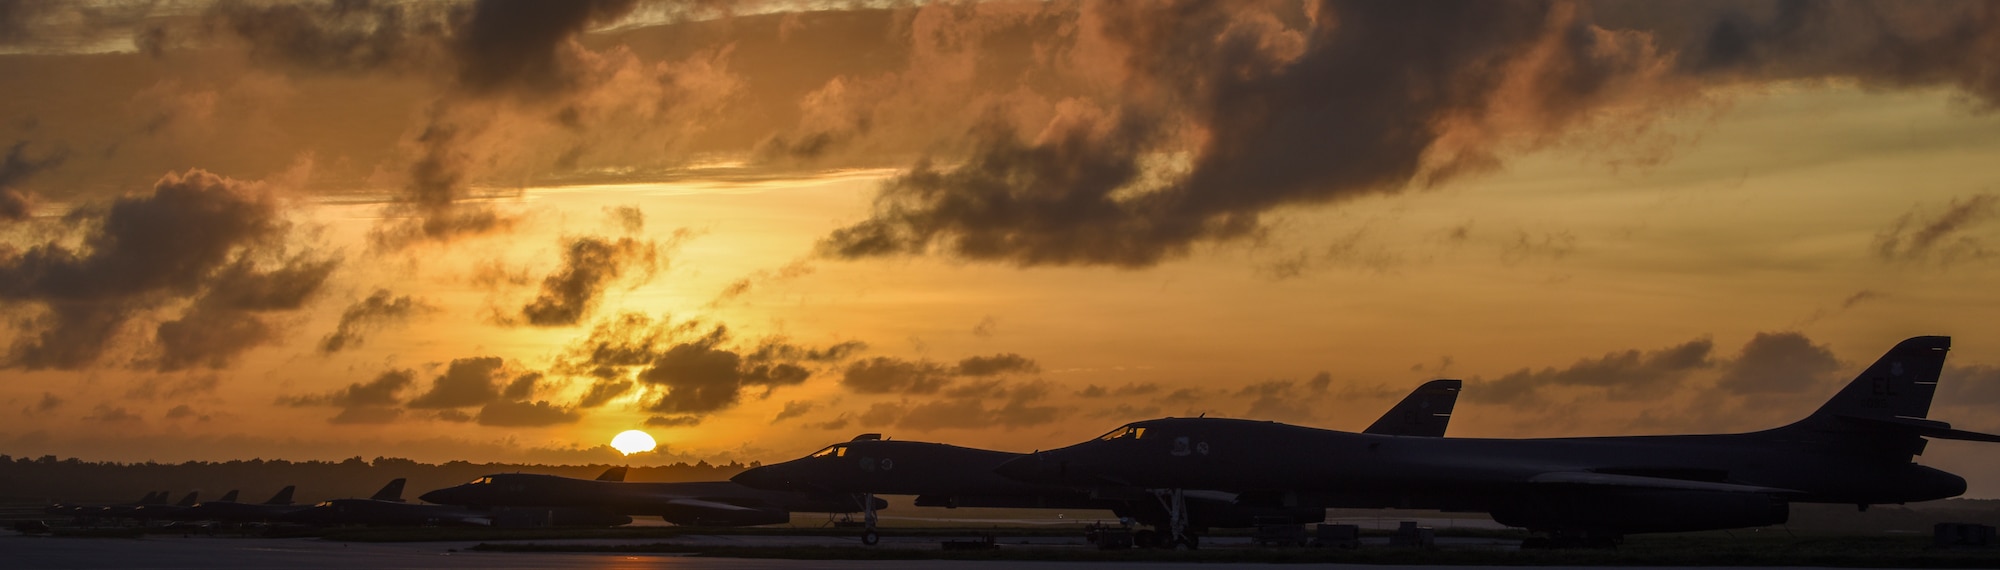 U.S. Air Force B-1B Lancers assigned to the 9th Expeditionary Bomb Squadron, deployed from Dyess Air Force Base, Texas, and the 34th EBS, assigned to Ellsworth Air Force Base, S.D., sit beside one another on the flightline Feb. 6, 2017, at Andersen AFB, Guam. The B-1B’s speed and superior handling characteristics allow it to seamlessly integrate in mixed force packages. These capabilities, when combined with its substantial payload, excellent radar targeting system, long loiter time and survivability, make the B-1B a key element of any joint/composite strike force. The 9th EBS is taking over U.S. Pacific Command’s Continuous Bomber Presence operations from the 34th EBS. The CBP mission is part of a long-standing history of maintaining a consistent bomber presence in the Indo-Asia-Pacific in order to maintain regional stability, and provide assurance to our allies and partners in the region. (U.S. Air Force photo by Tech. Sgt. Richard P. Ebensberger/Released)